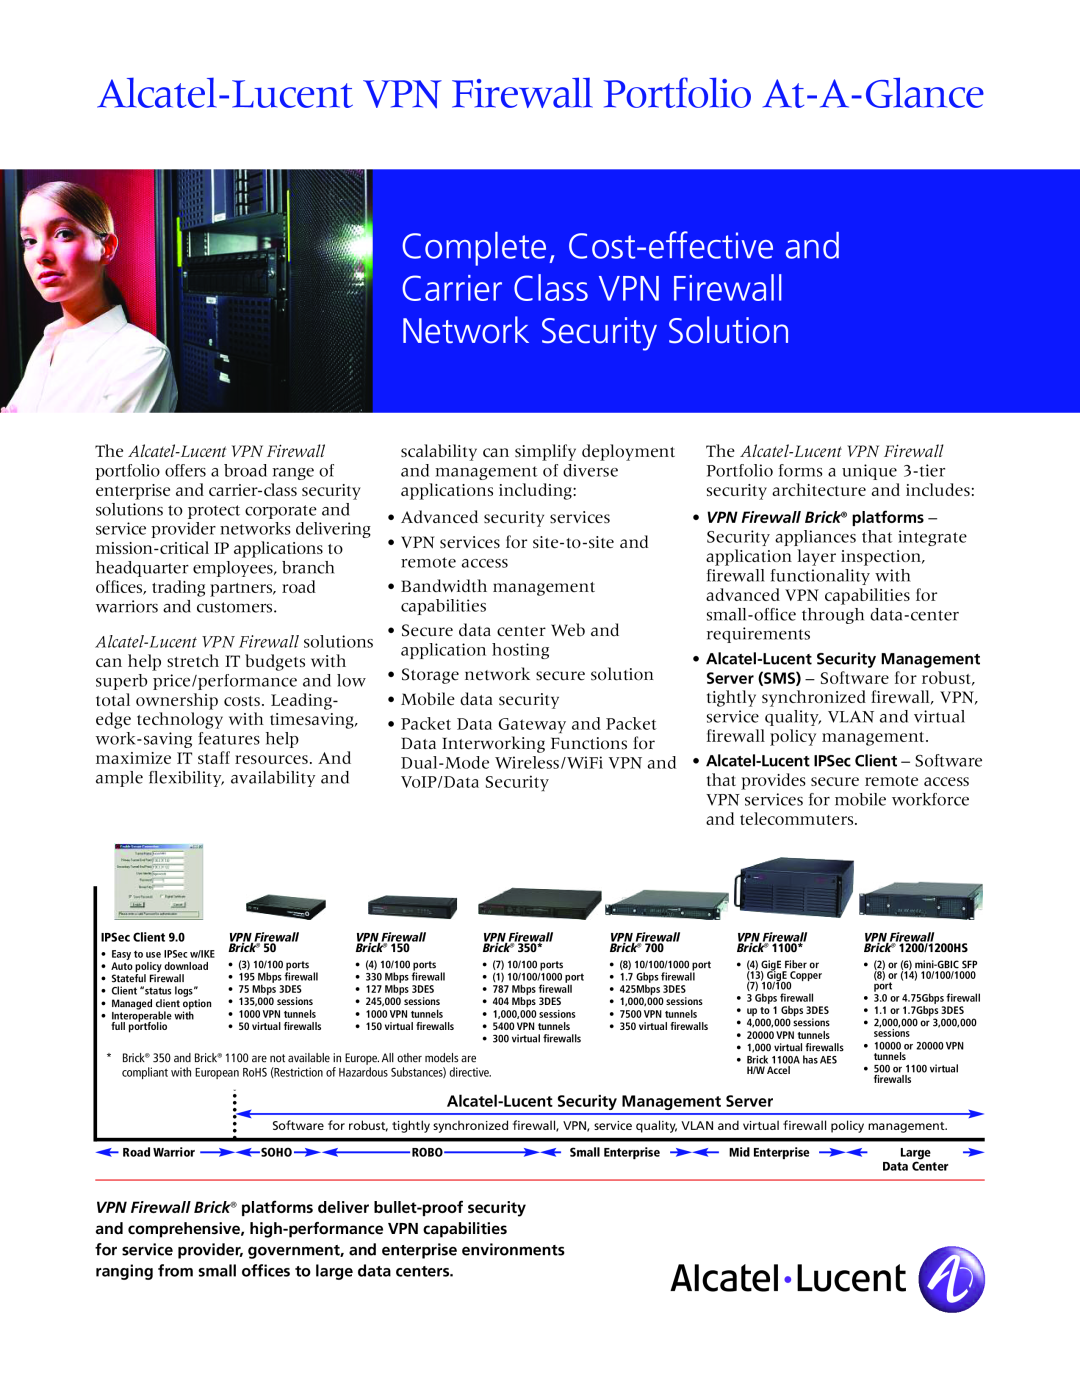 Alcatel-Lucent manual Alcatel-Lucent VPN Firewall Portfolio At-A-Glance, Network Security Solution 